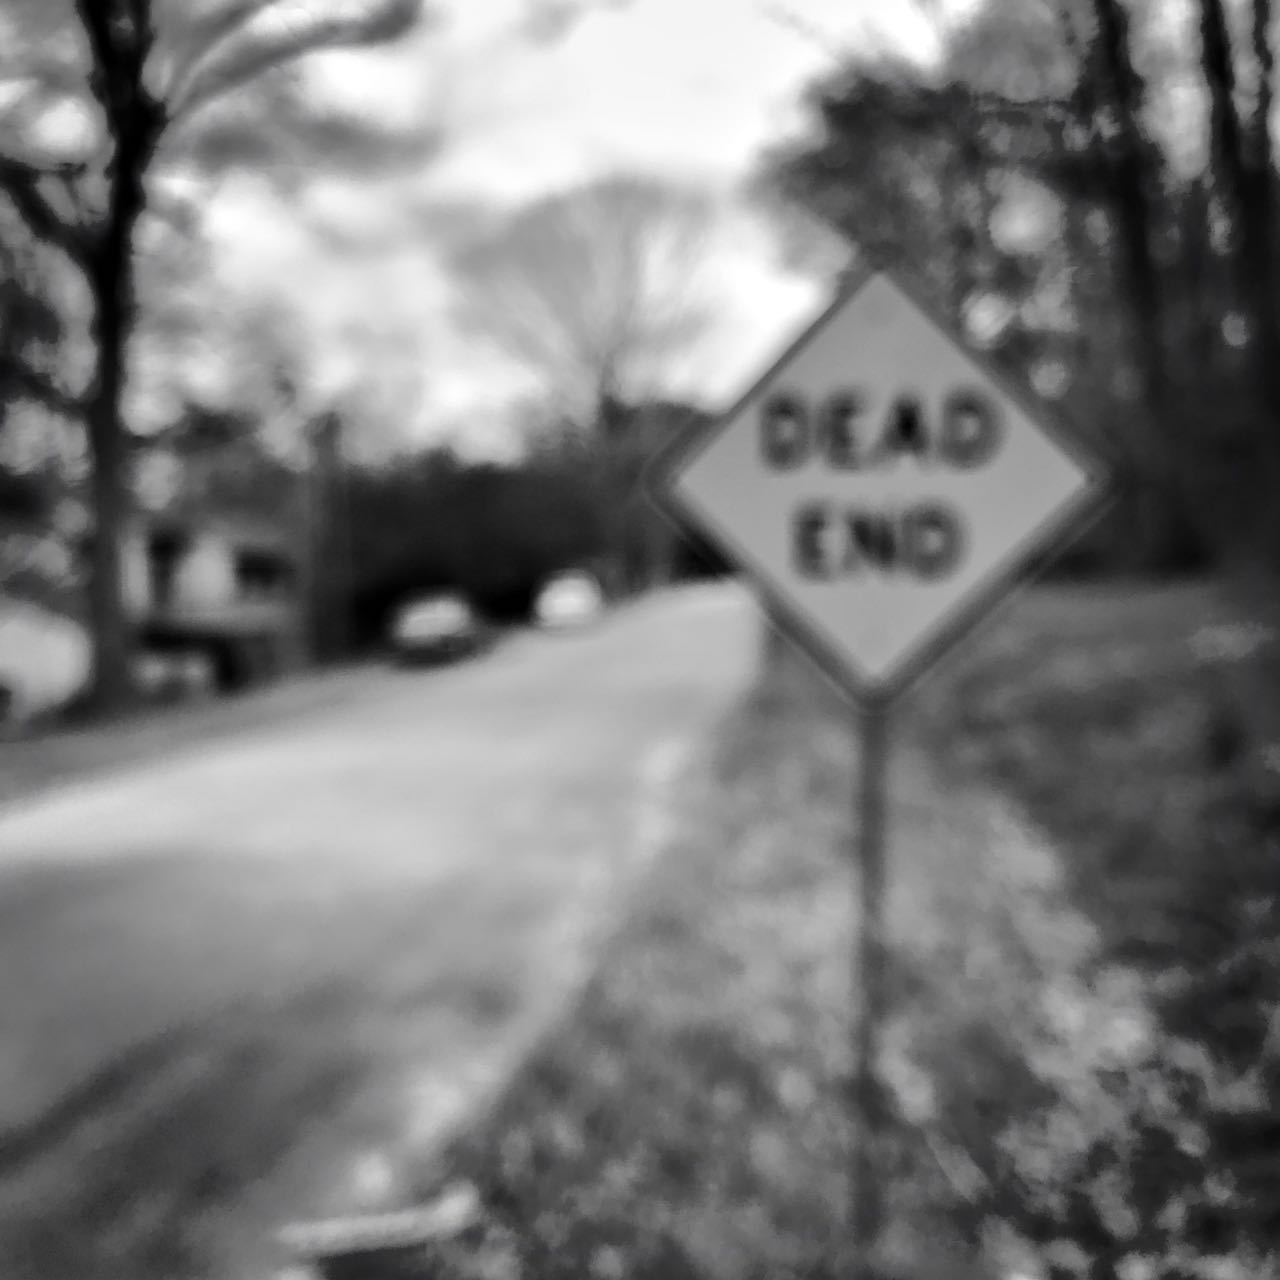 Blurry dead end sign